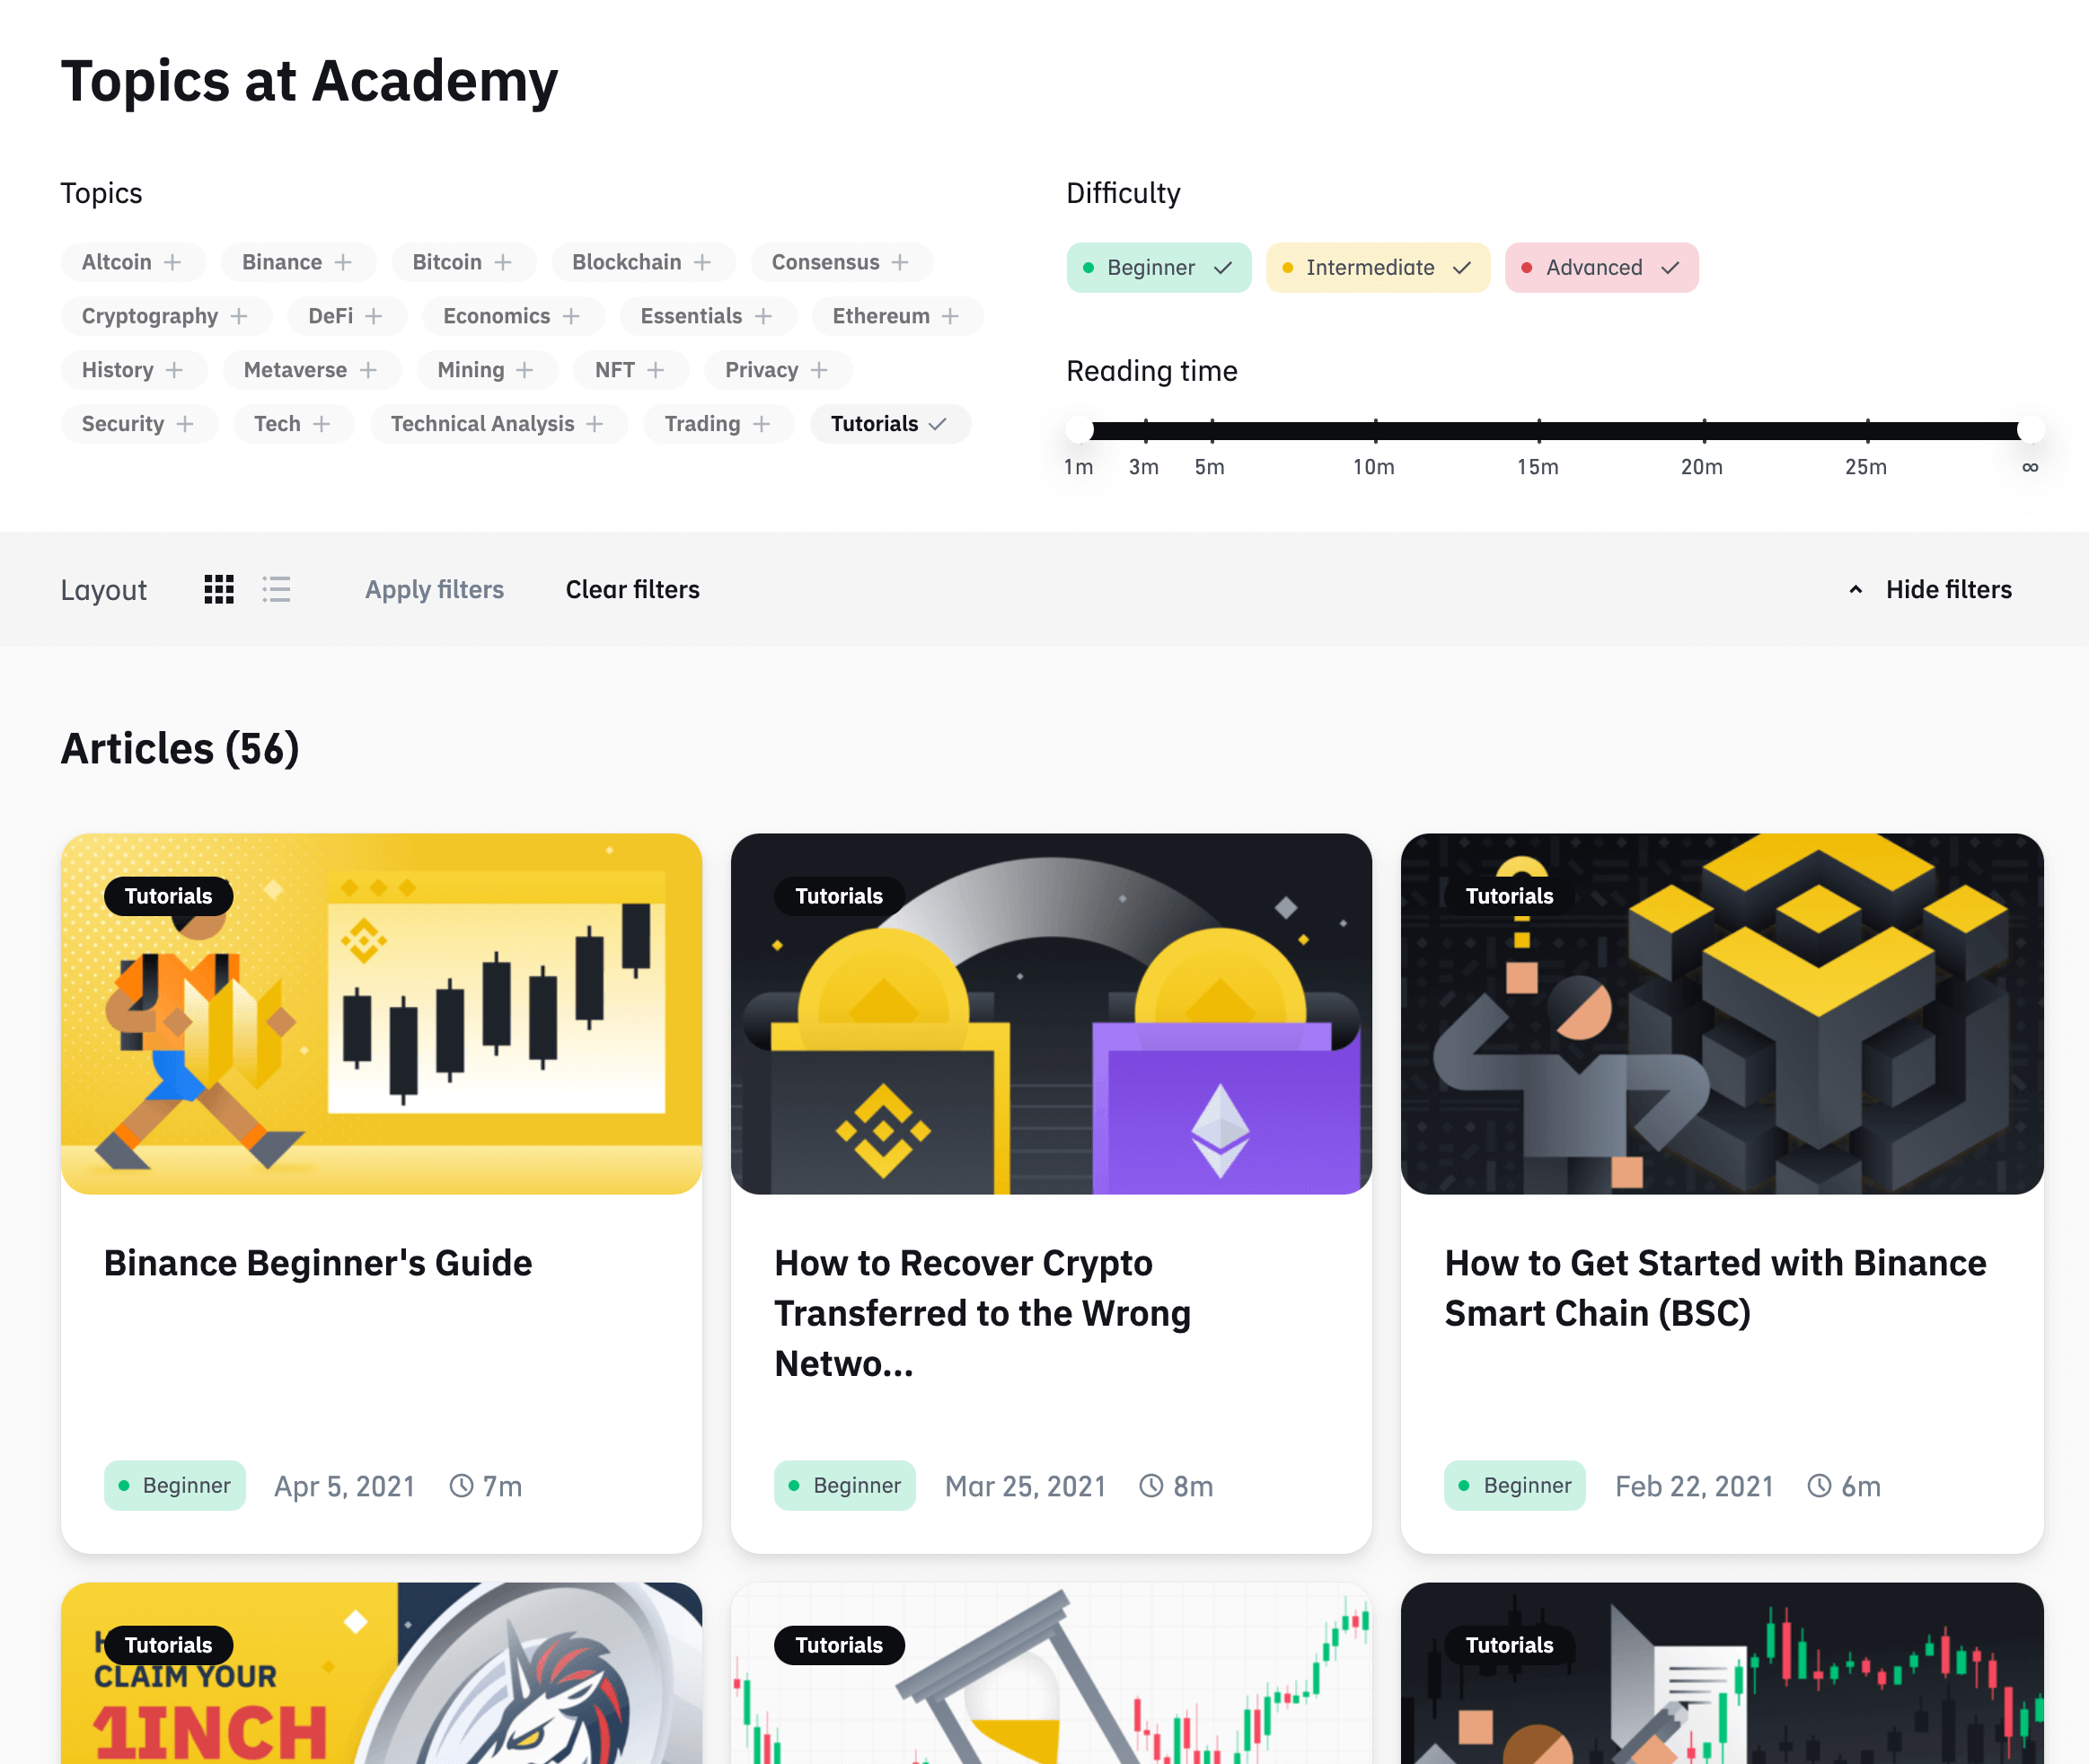 View of Binance Academy. Articles can be filtered by topics such as Altcoin, Bitcoin and DeFi. Other filter options include difficulty (Beginner, Intermediate and Advanced) and reading time.